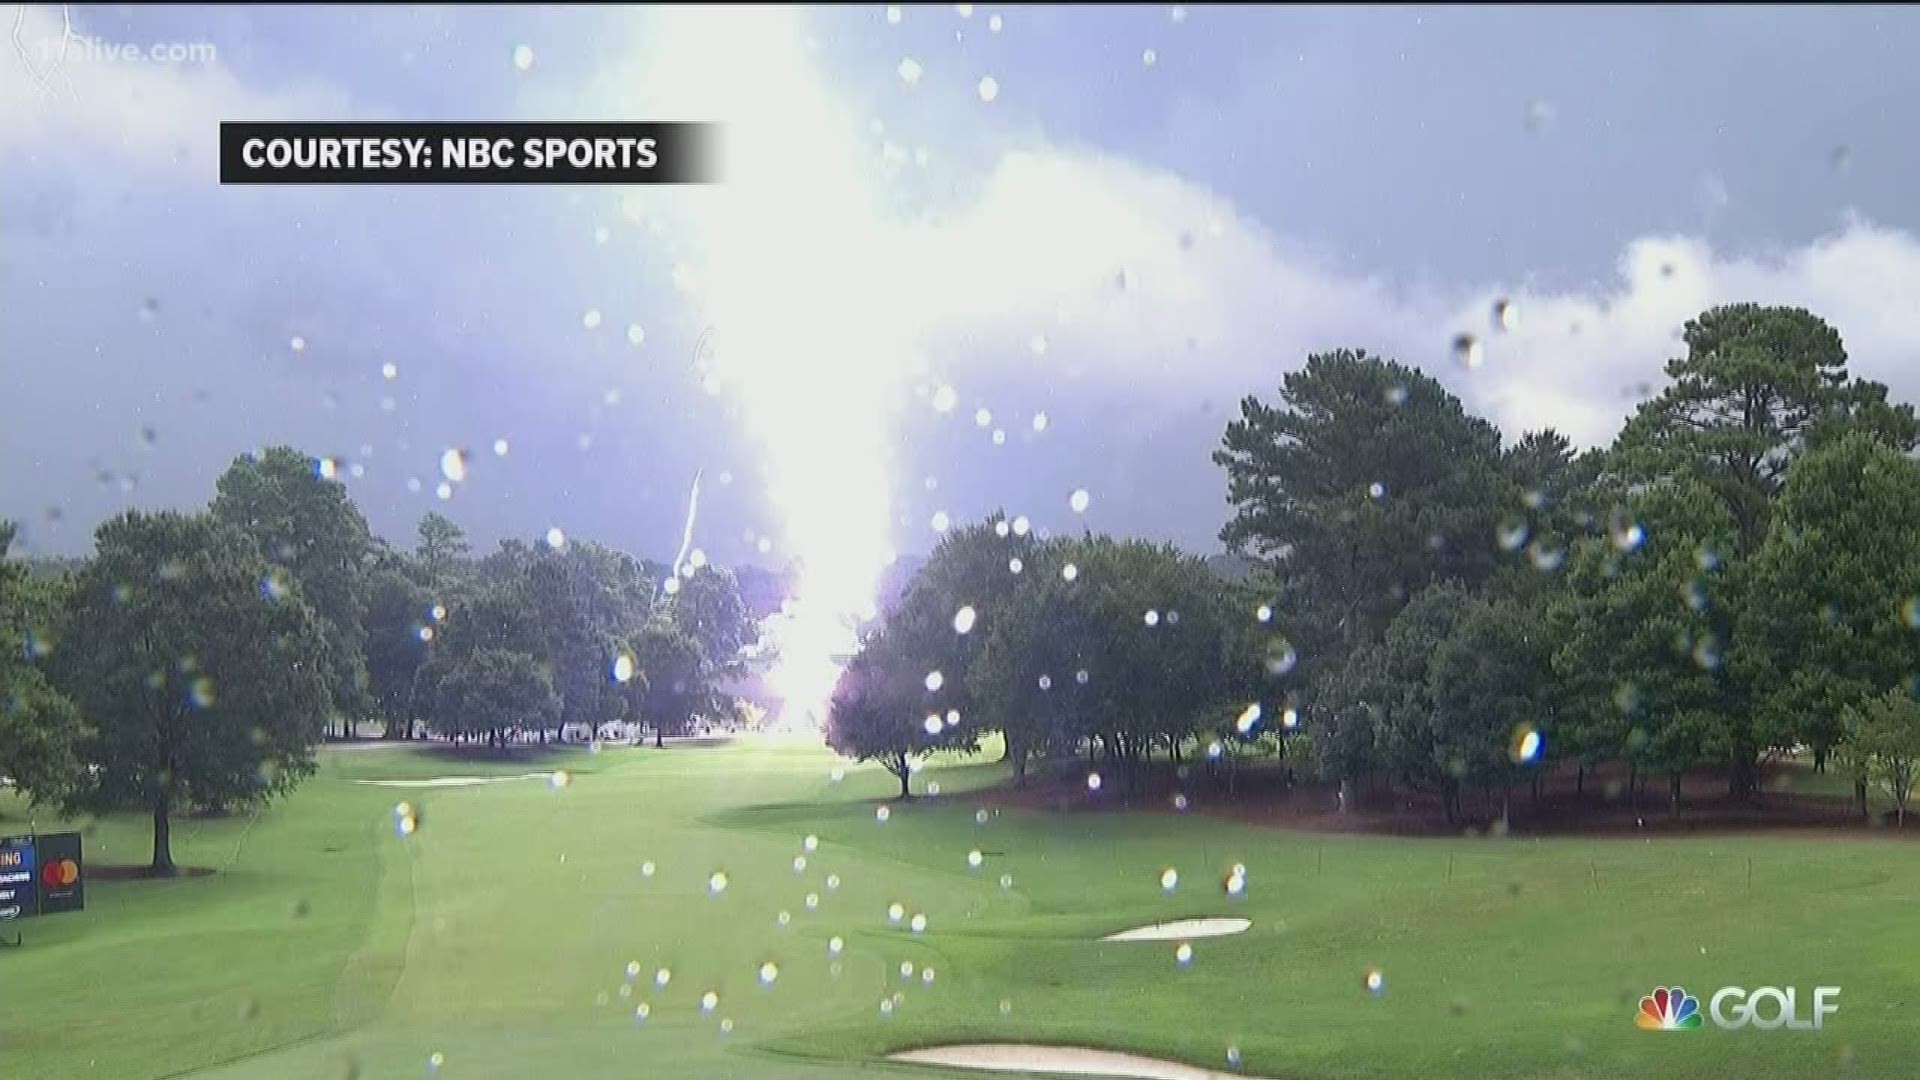 After Saturday afternoon's storms produced a lightning strike that injured six people, including a 12-year-old child, at the PGA TOUR Championship in Atlanta, spectators returned to the East Lake Golf Club Sunday morning, ready for more professional golf.